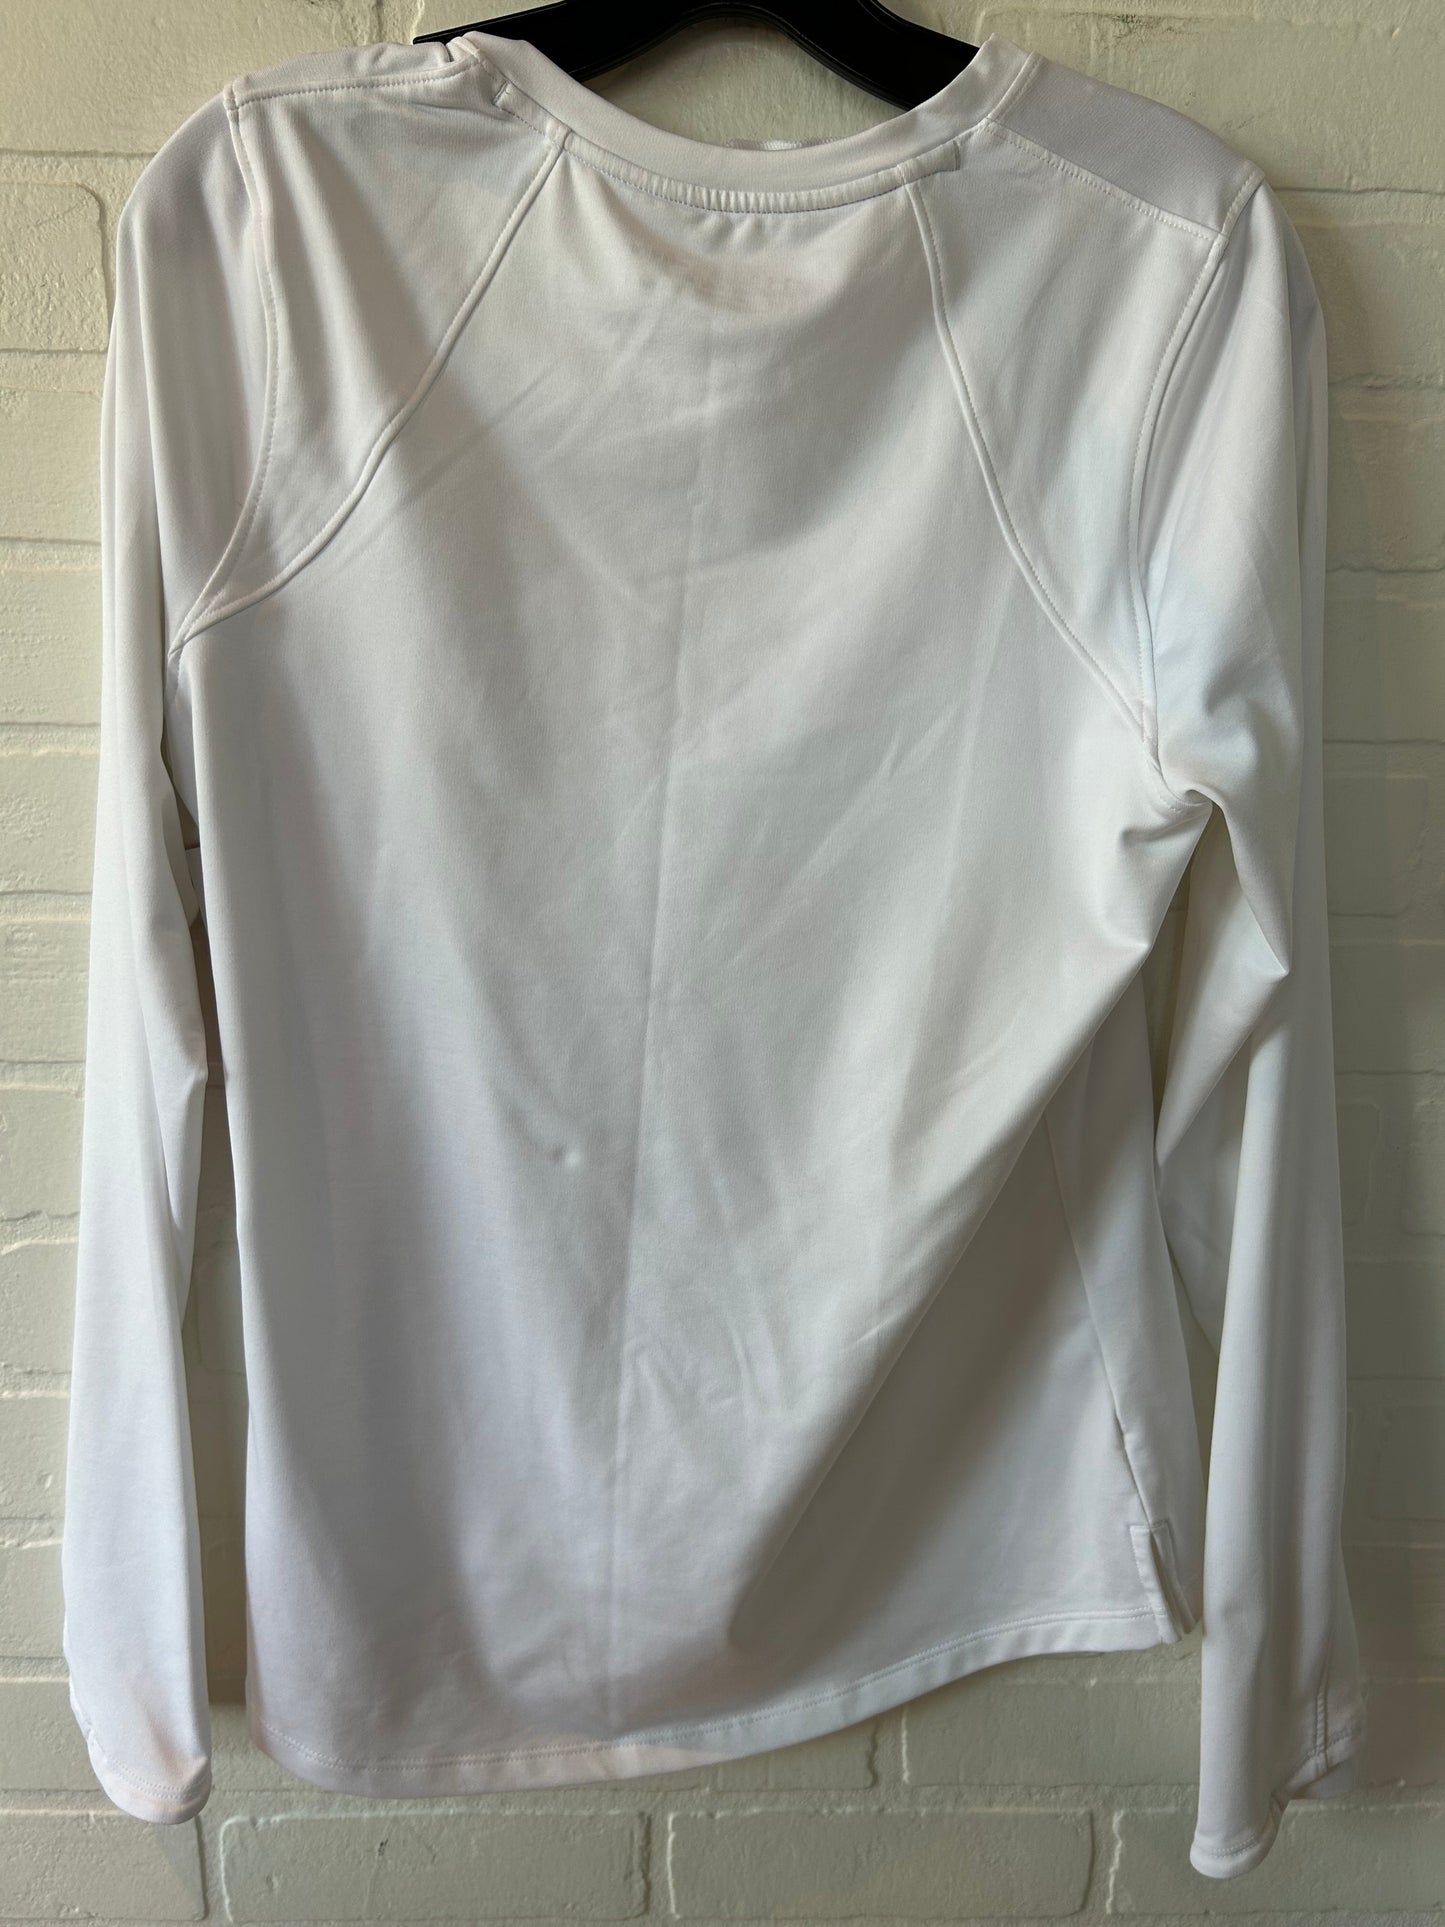 White Athletic Top Long Sleeve Crewneck Under Armour, Size M